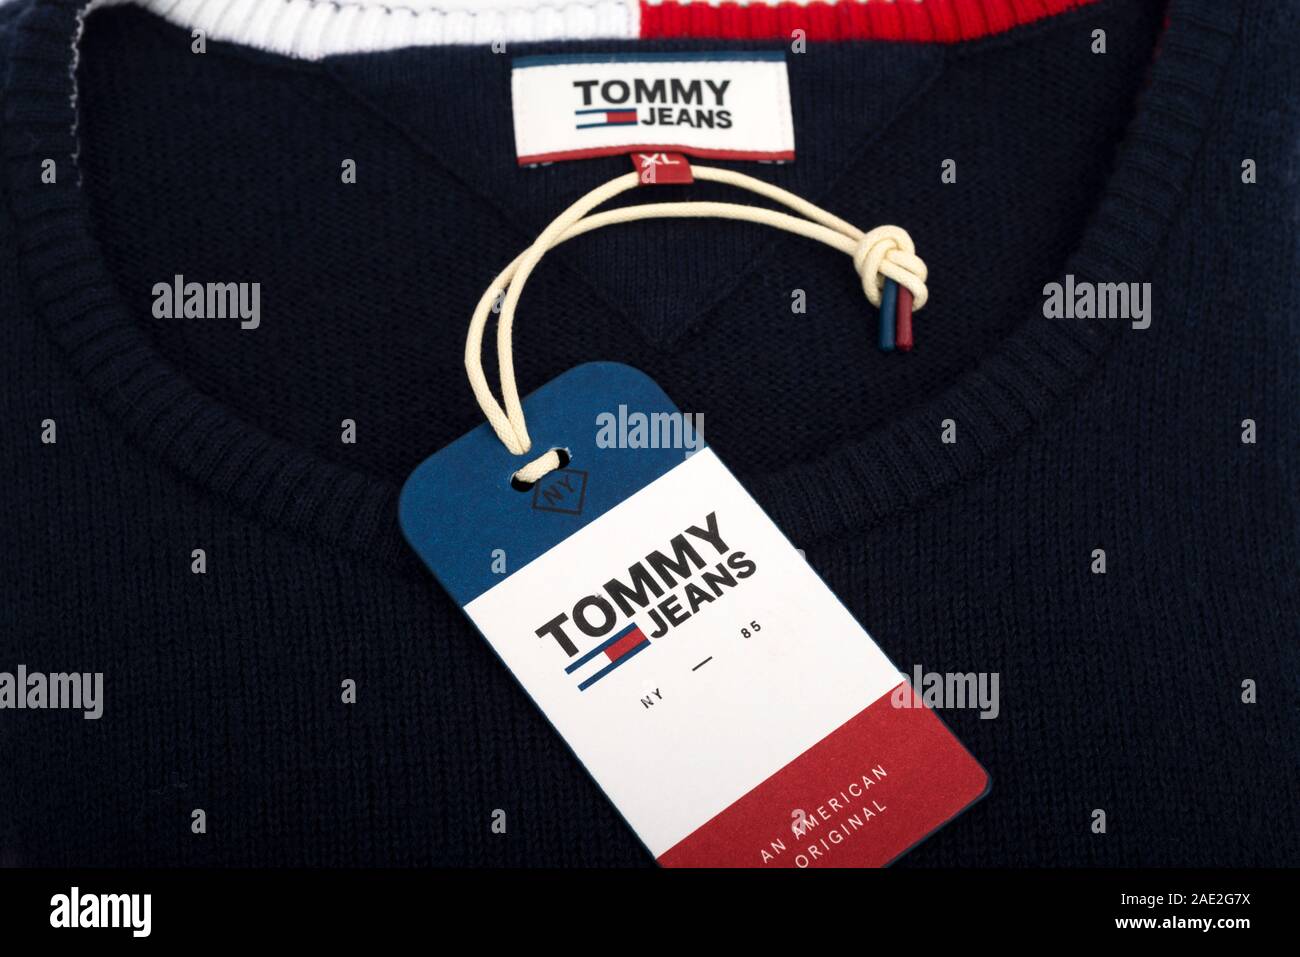 Tommy Jeans High Resolution Stock 